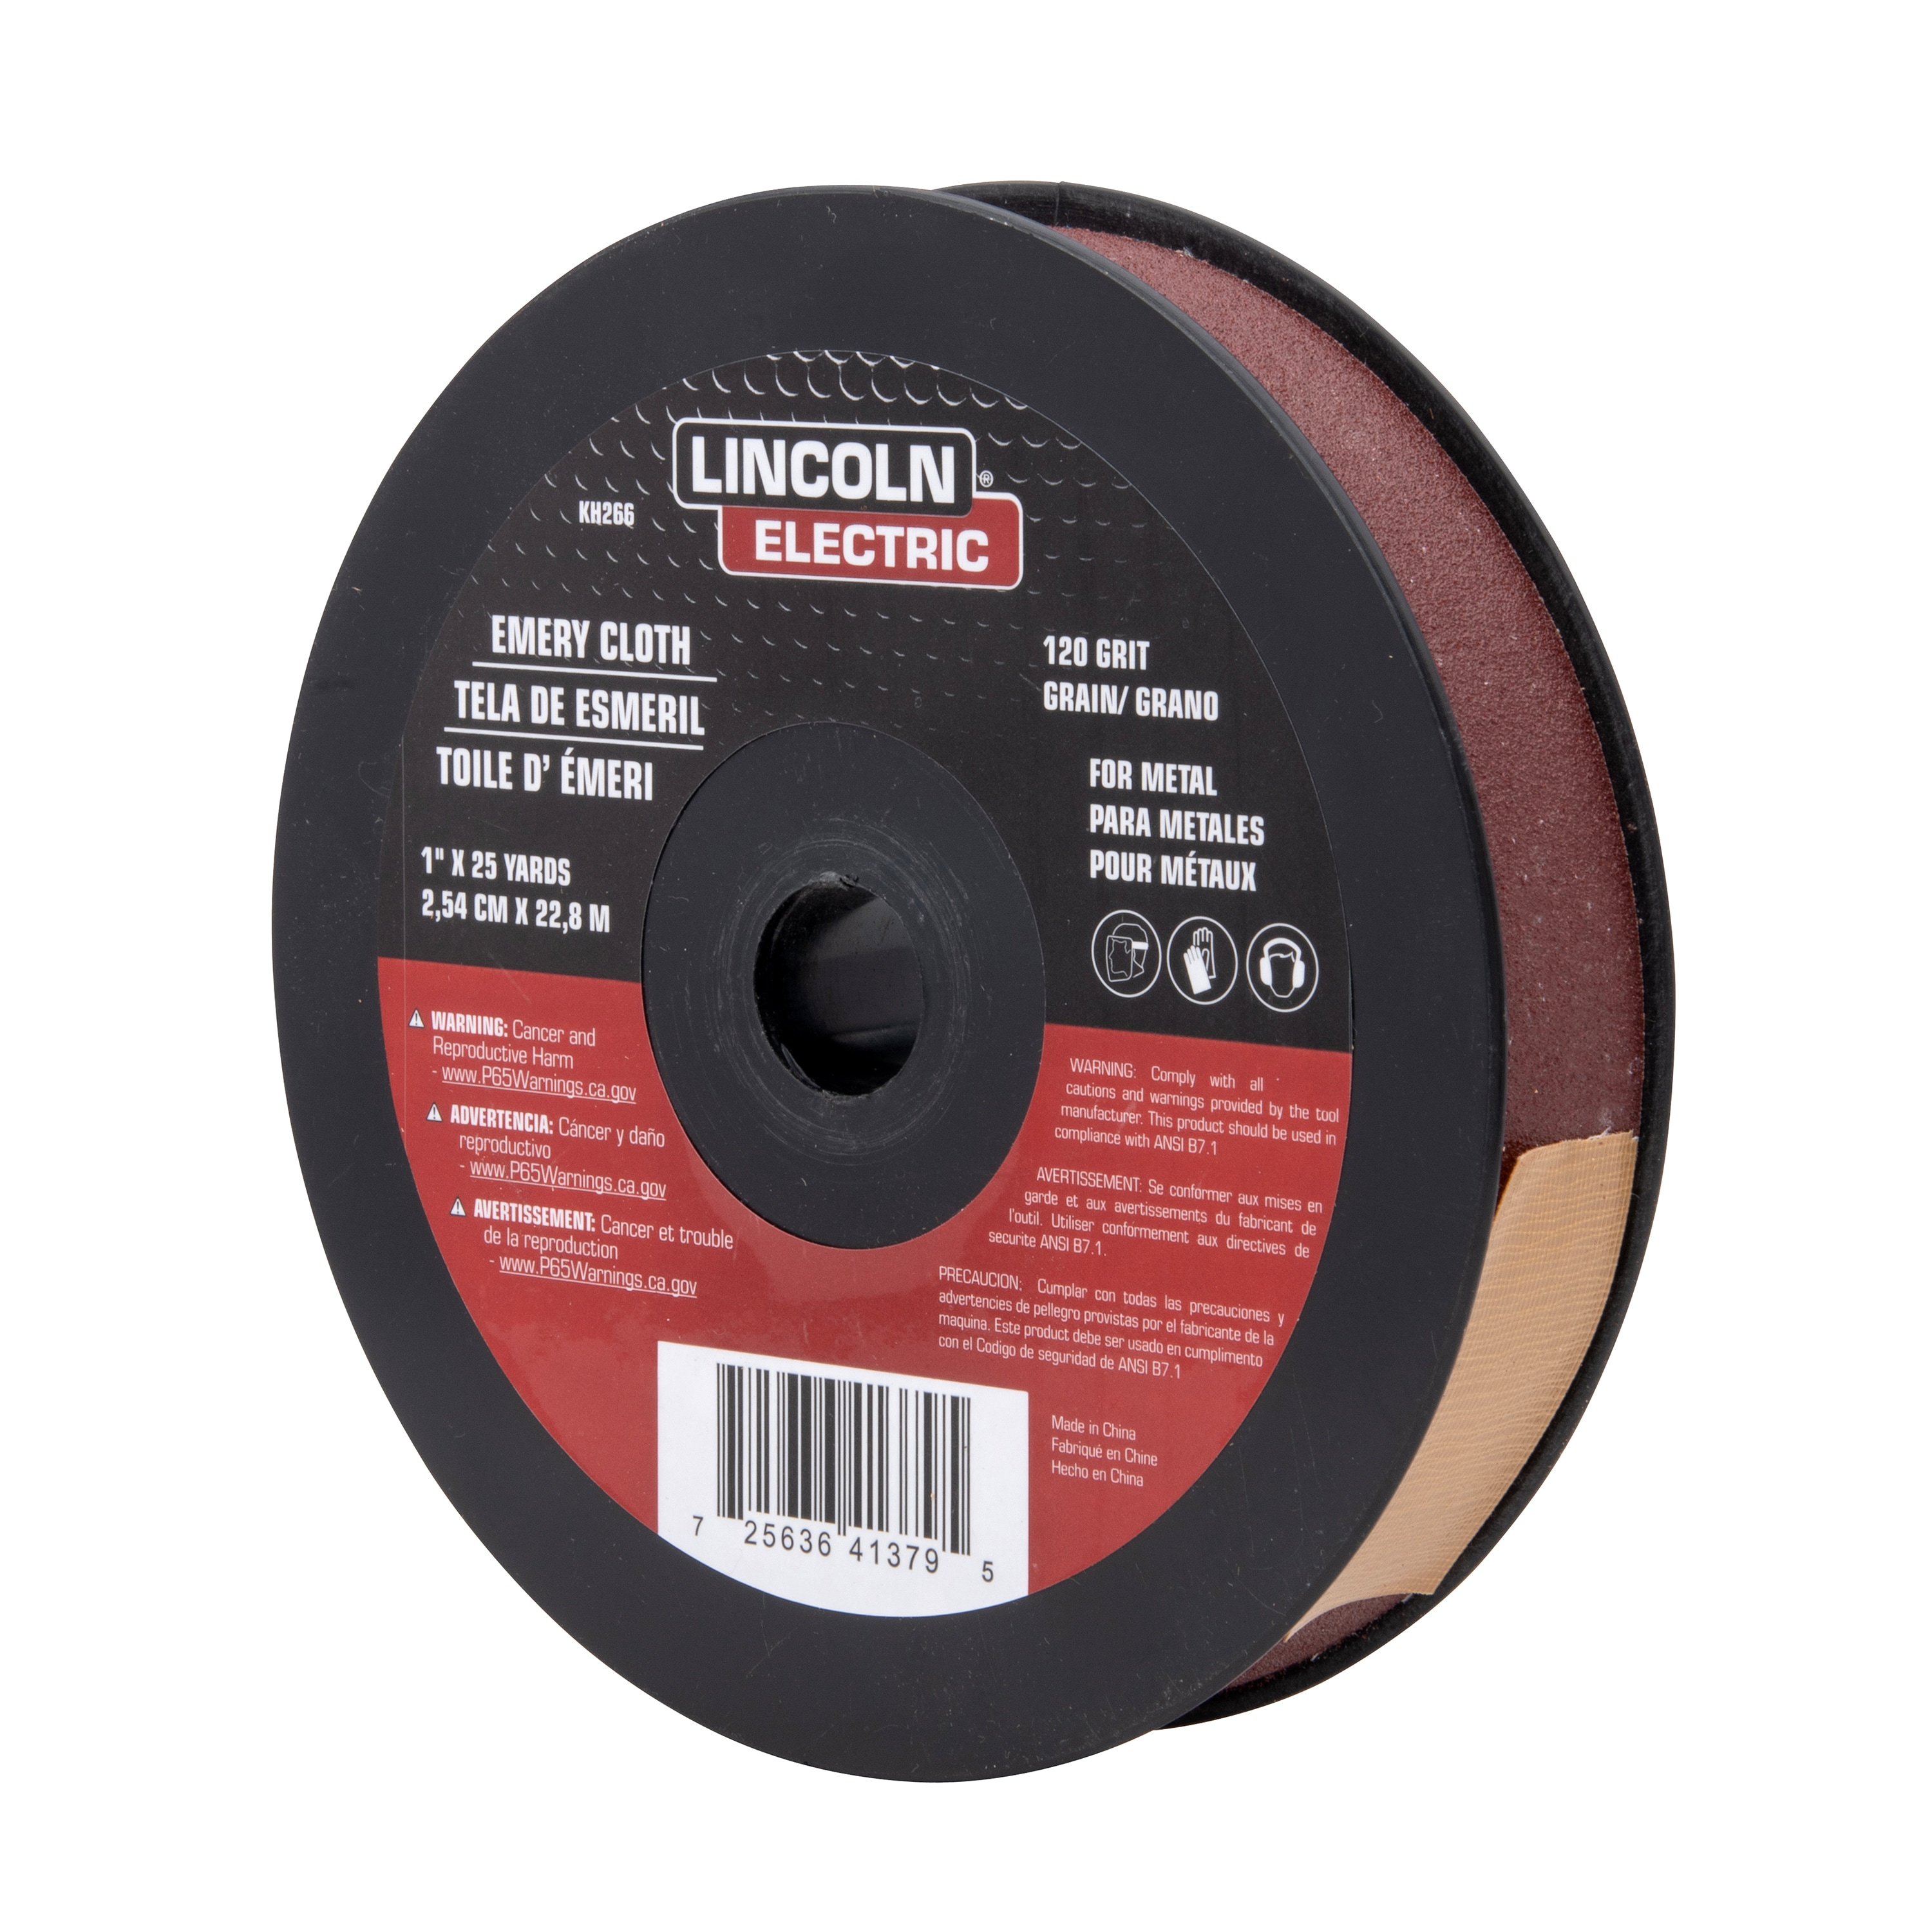 2 Lincoln Electric KH266 Abrasive Roll 1" X 25 Yds Emery Cloth 120 Grit for sale online